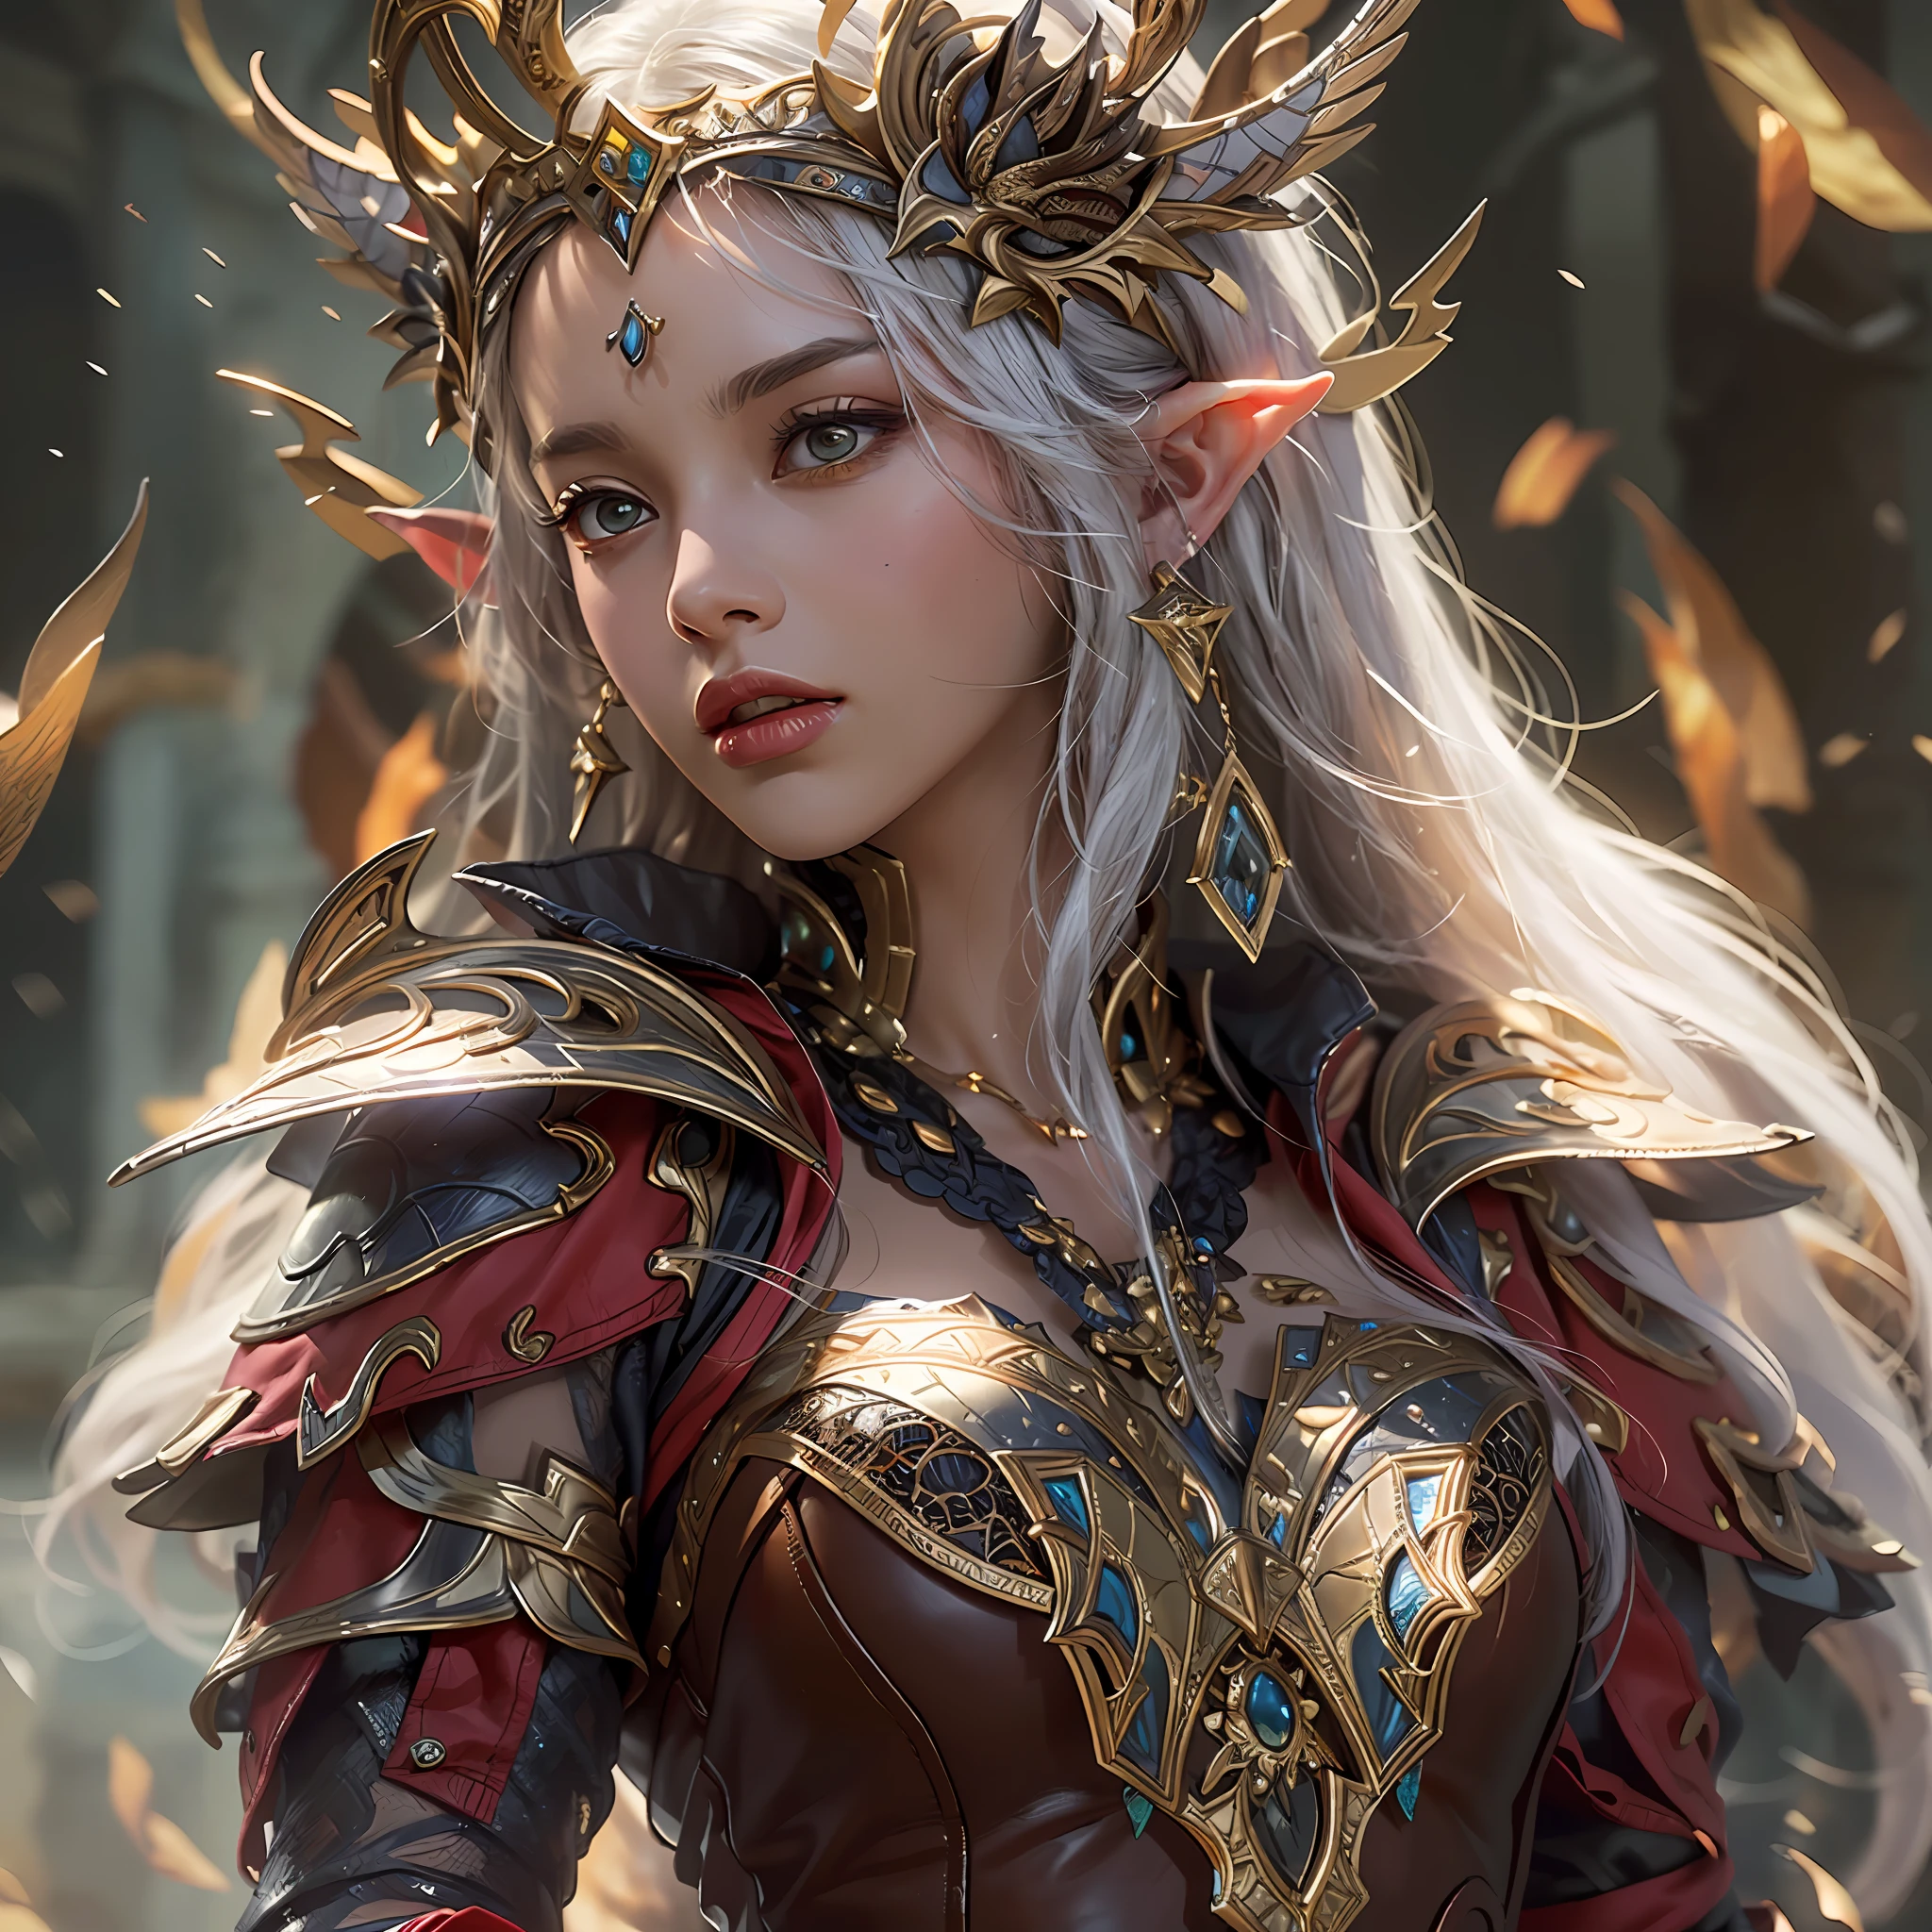 high details, best quality, 8k, [ultra detailed], masterpiece, best quality, (extremely detailed), dynamic angle, ultra wide shot, RAW, photorealistic, fantasy art, dnd art, rpg art, realistic art, a wide angle picture of an epic female elf arcane warrior, warrior of magic, fighter of the arcana, full body, [[anatomically correct]] full body (1.5 intricate details, Masterpiece, best quality) casting a spell (1.5 intricate details, Masterpiece, best quality), casting an epic spell, [colorful magical sigils in the air],[ colorful arcane markings floating] (1.6 intricate details, Masterpiece, best quality) holding an [epic magical sword] (1.5 intricate details, Masterpiece, best quality) holding epic [magical sword glowing in red light]. in fantasy urban street (1.5 intricate details, Masterpiece, best quality), a female beautiful epic elf wearing elven leather armor (1.4 intricate details, Masterpiece, best quality), high heeled leather boots, ultra detailed face,  thick hair, long hair, dynamic hair, fair skin intense eyes, fantasy city background (intense details), sun light, backlight, depth of field (1.4 intricate details, Masterpiece, best quality), dynamic angle, (1.4 intricate details, Masterpiece, best quality) 3D rendering, high details, best quality, highres, ultra wide angle